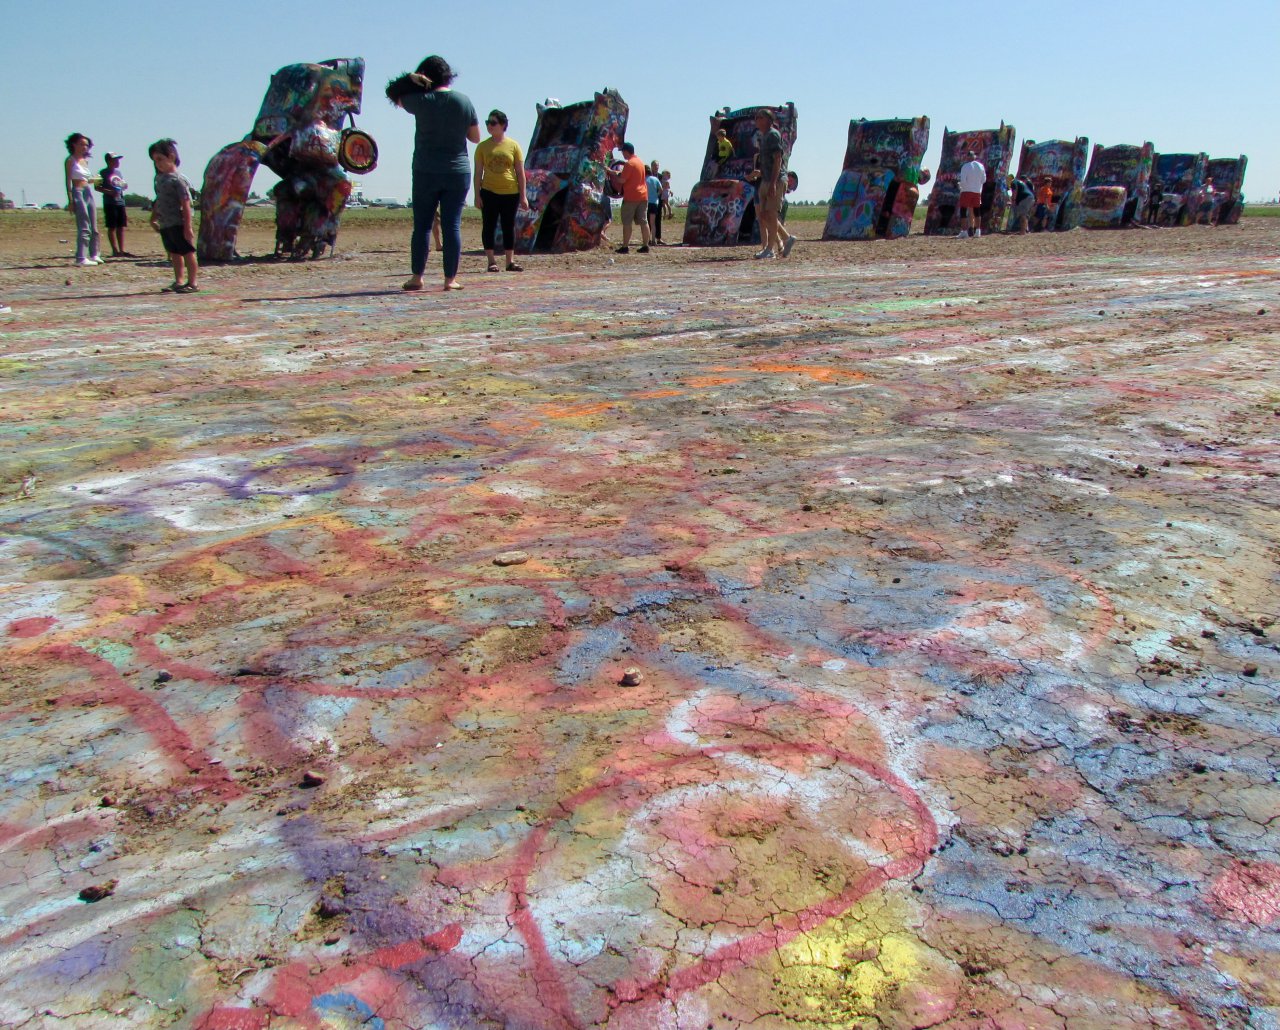 Cadillac Ranch, Changes don’t alter the essence of Cadillac Ranch, ClassicCars.com Journal